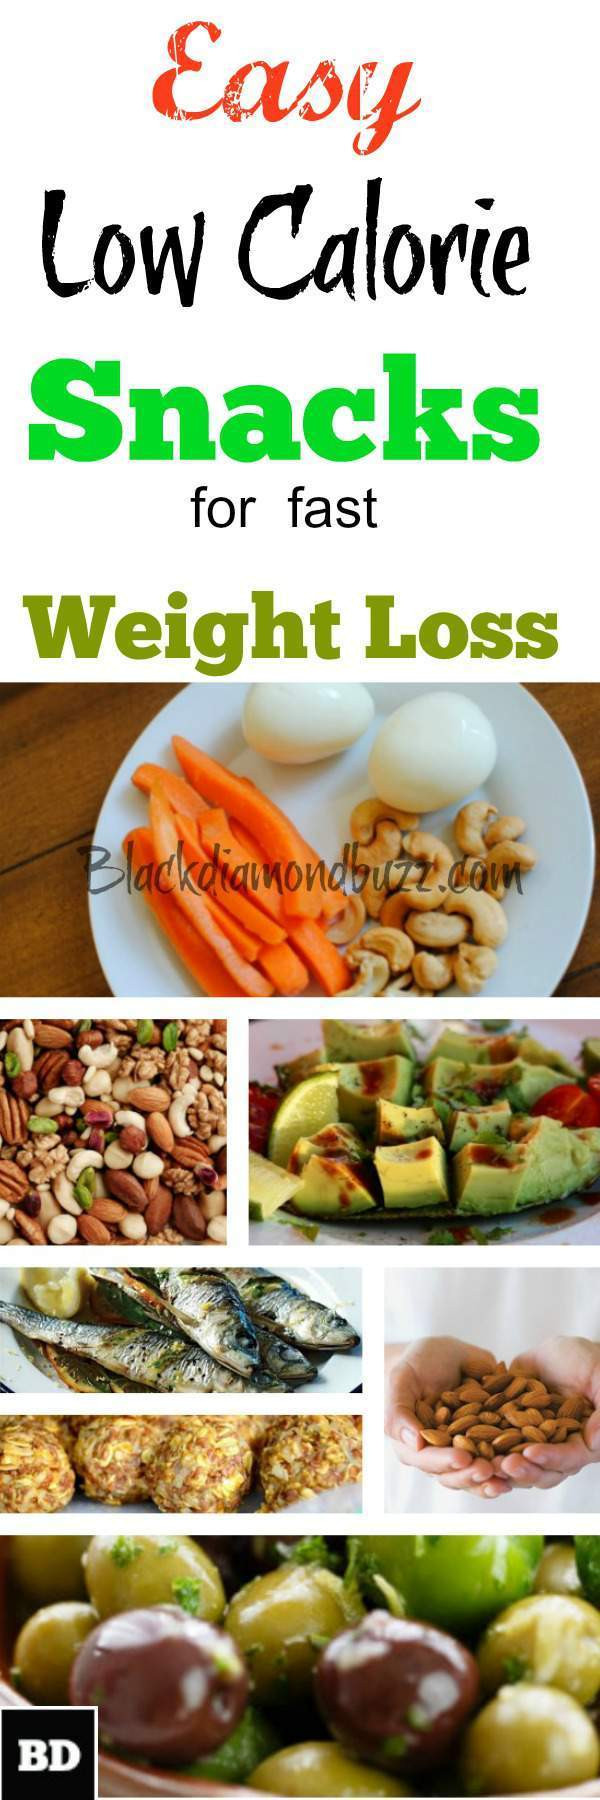 Best Healthy Snacks For Weight Loss
 10 Best Easy Healthy Low Calorie Snacks for Weight Loss